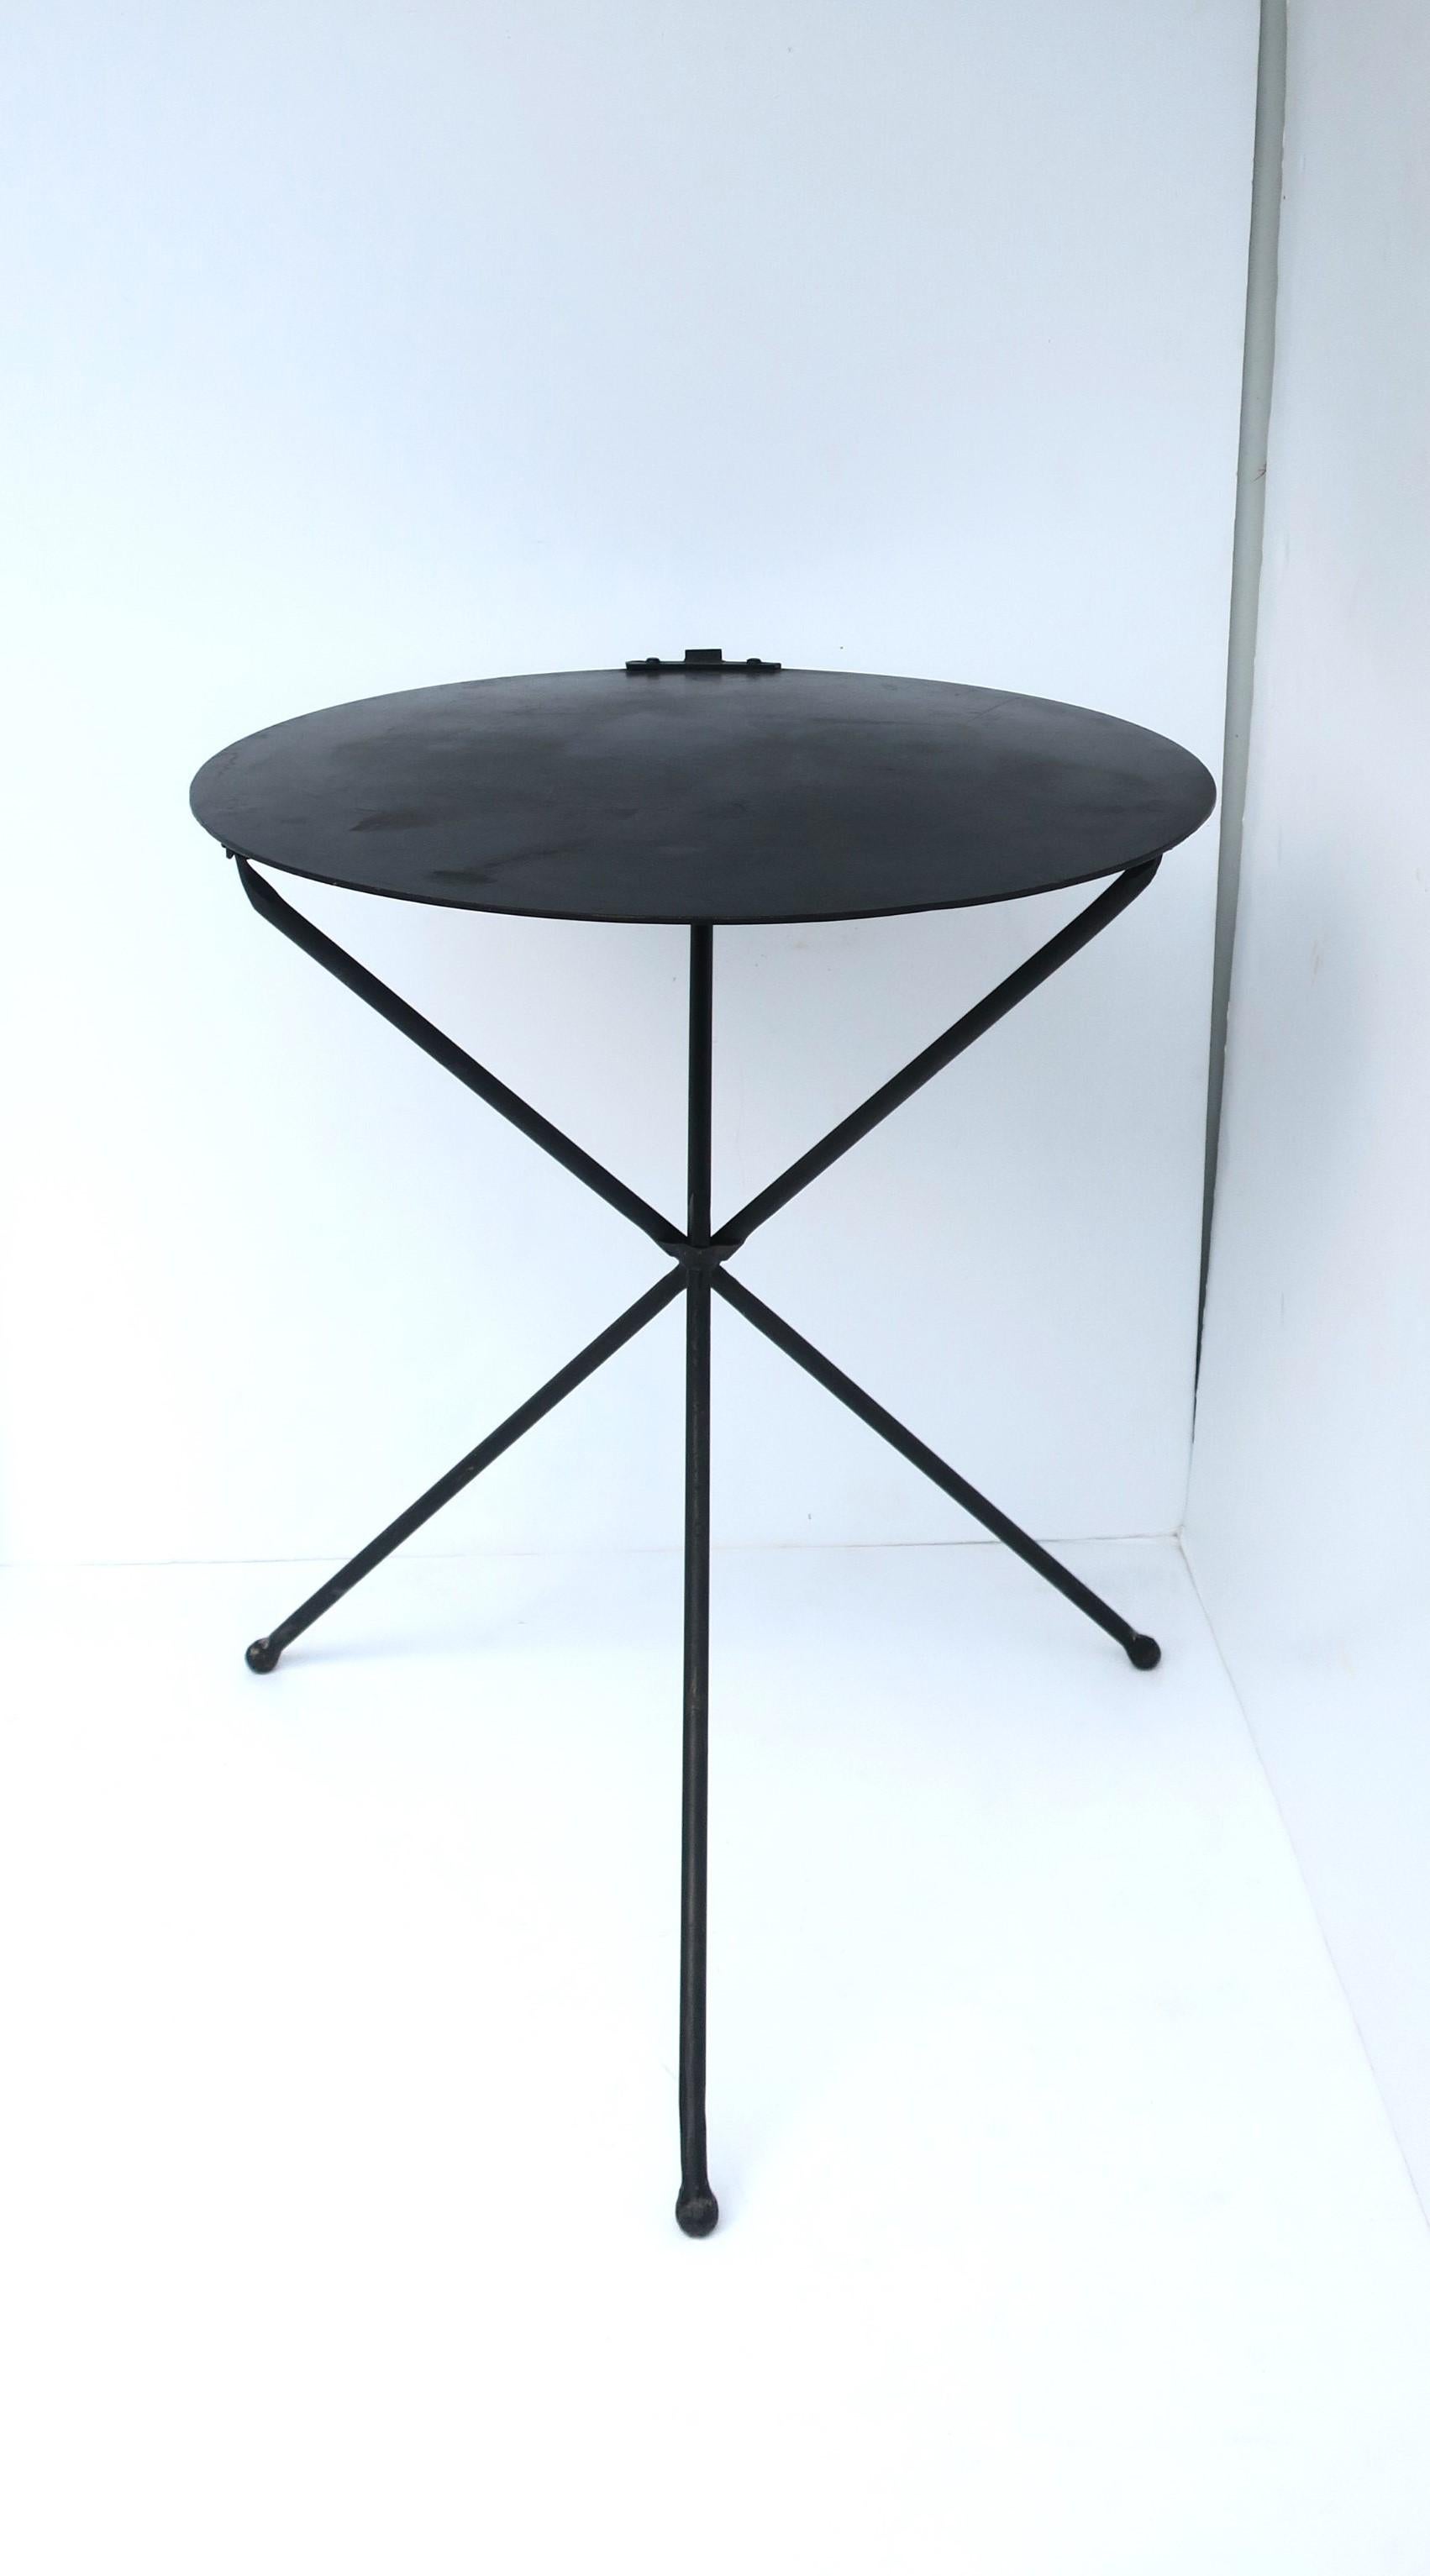 A substantial black metal end or side table with circular top and tripod base, circa late-20th century. Table is a blackened metal, strong, has a circular edgeless top with bult and loop/ring detail on one side/edge, finished with a tripod base and